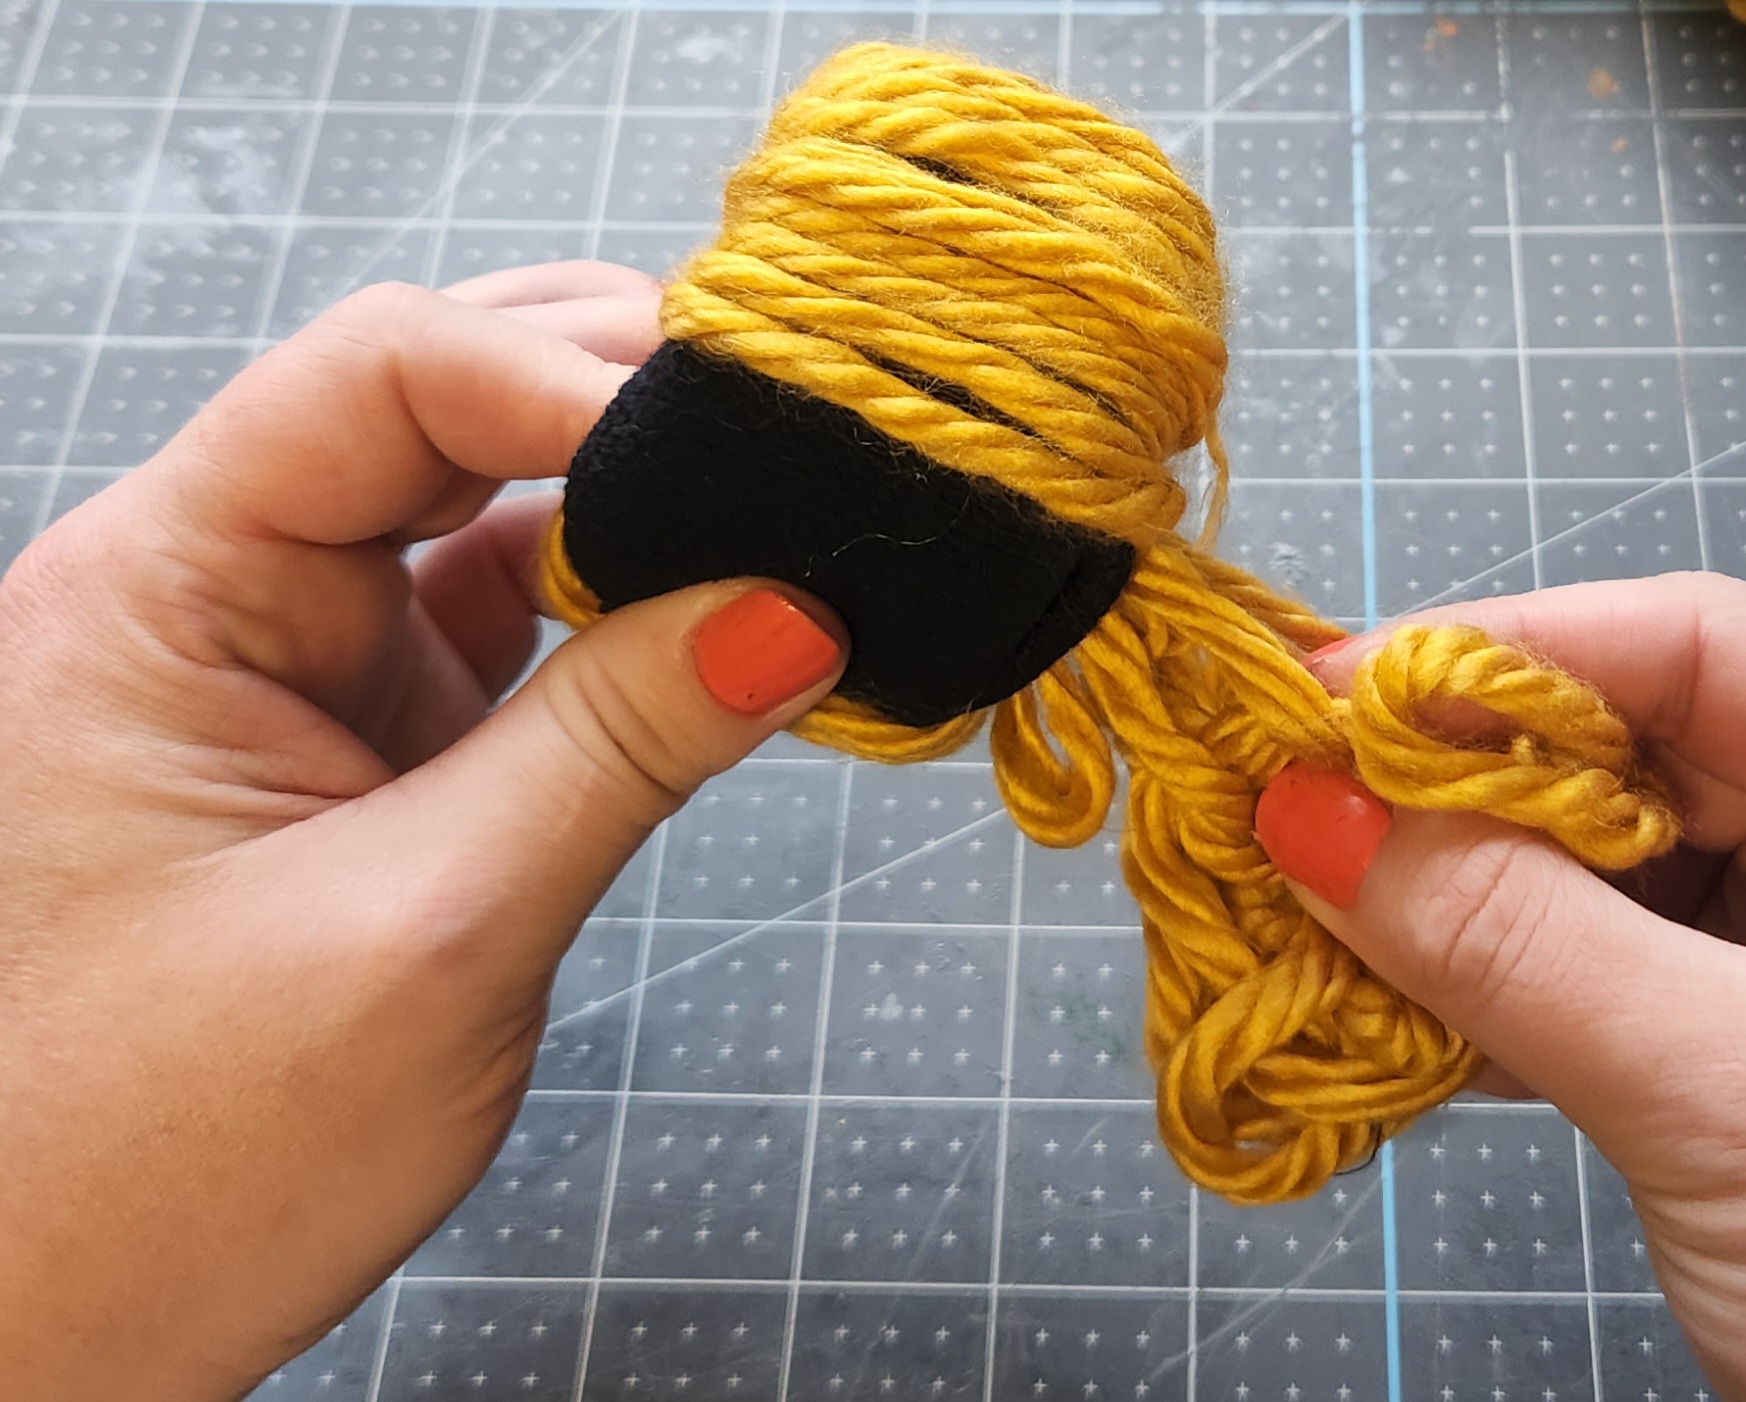 Passing yarn through the center of the sock bun, covering it.